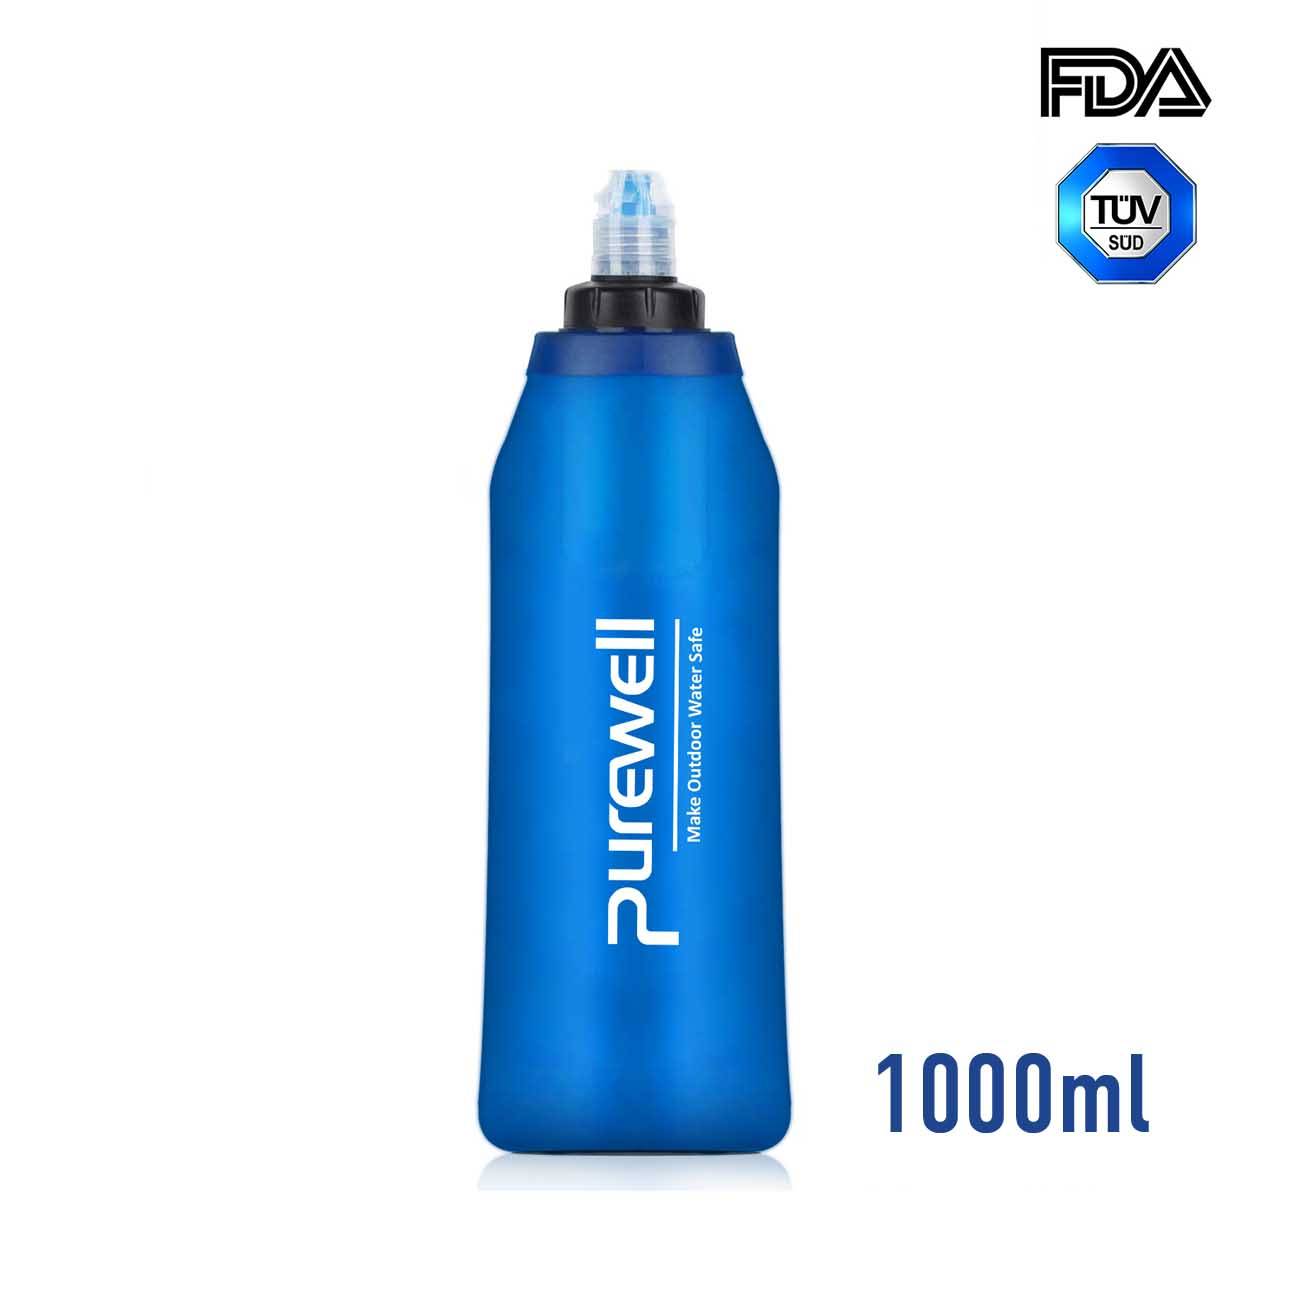 Purewell Outdoor Collapsible Soft Flask 1000ml with Filter for Running, Travel, Backpacking K8640